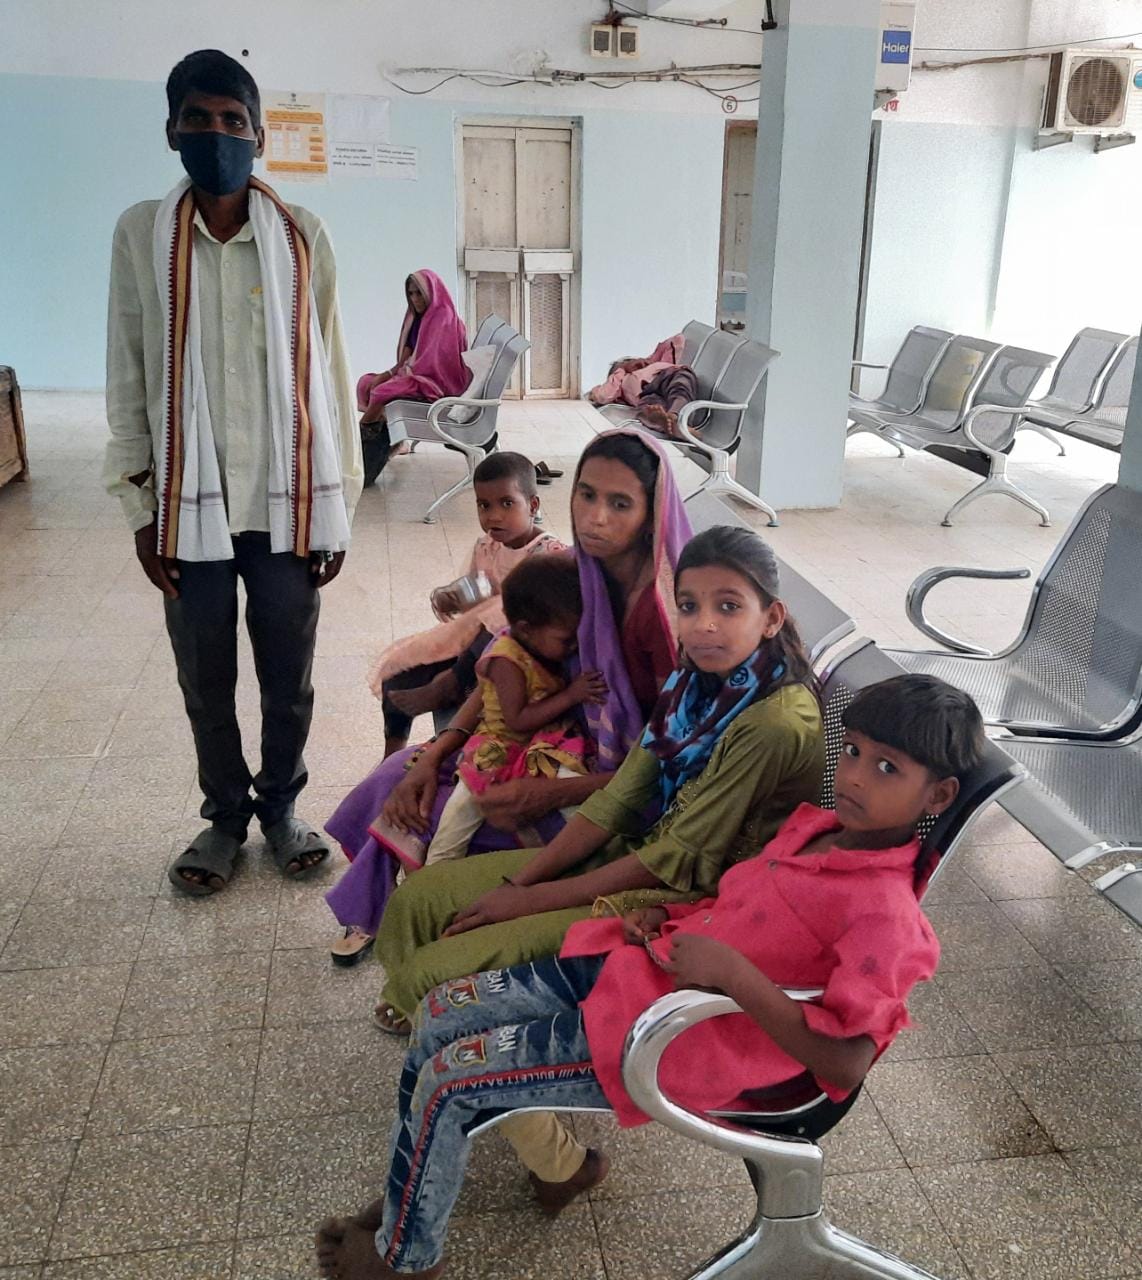 Low-cost healthcare helped save Bonda's life. Bonda is pictured at Chinchpada with his wife and 4 children.